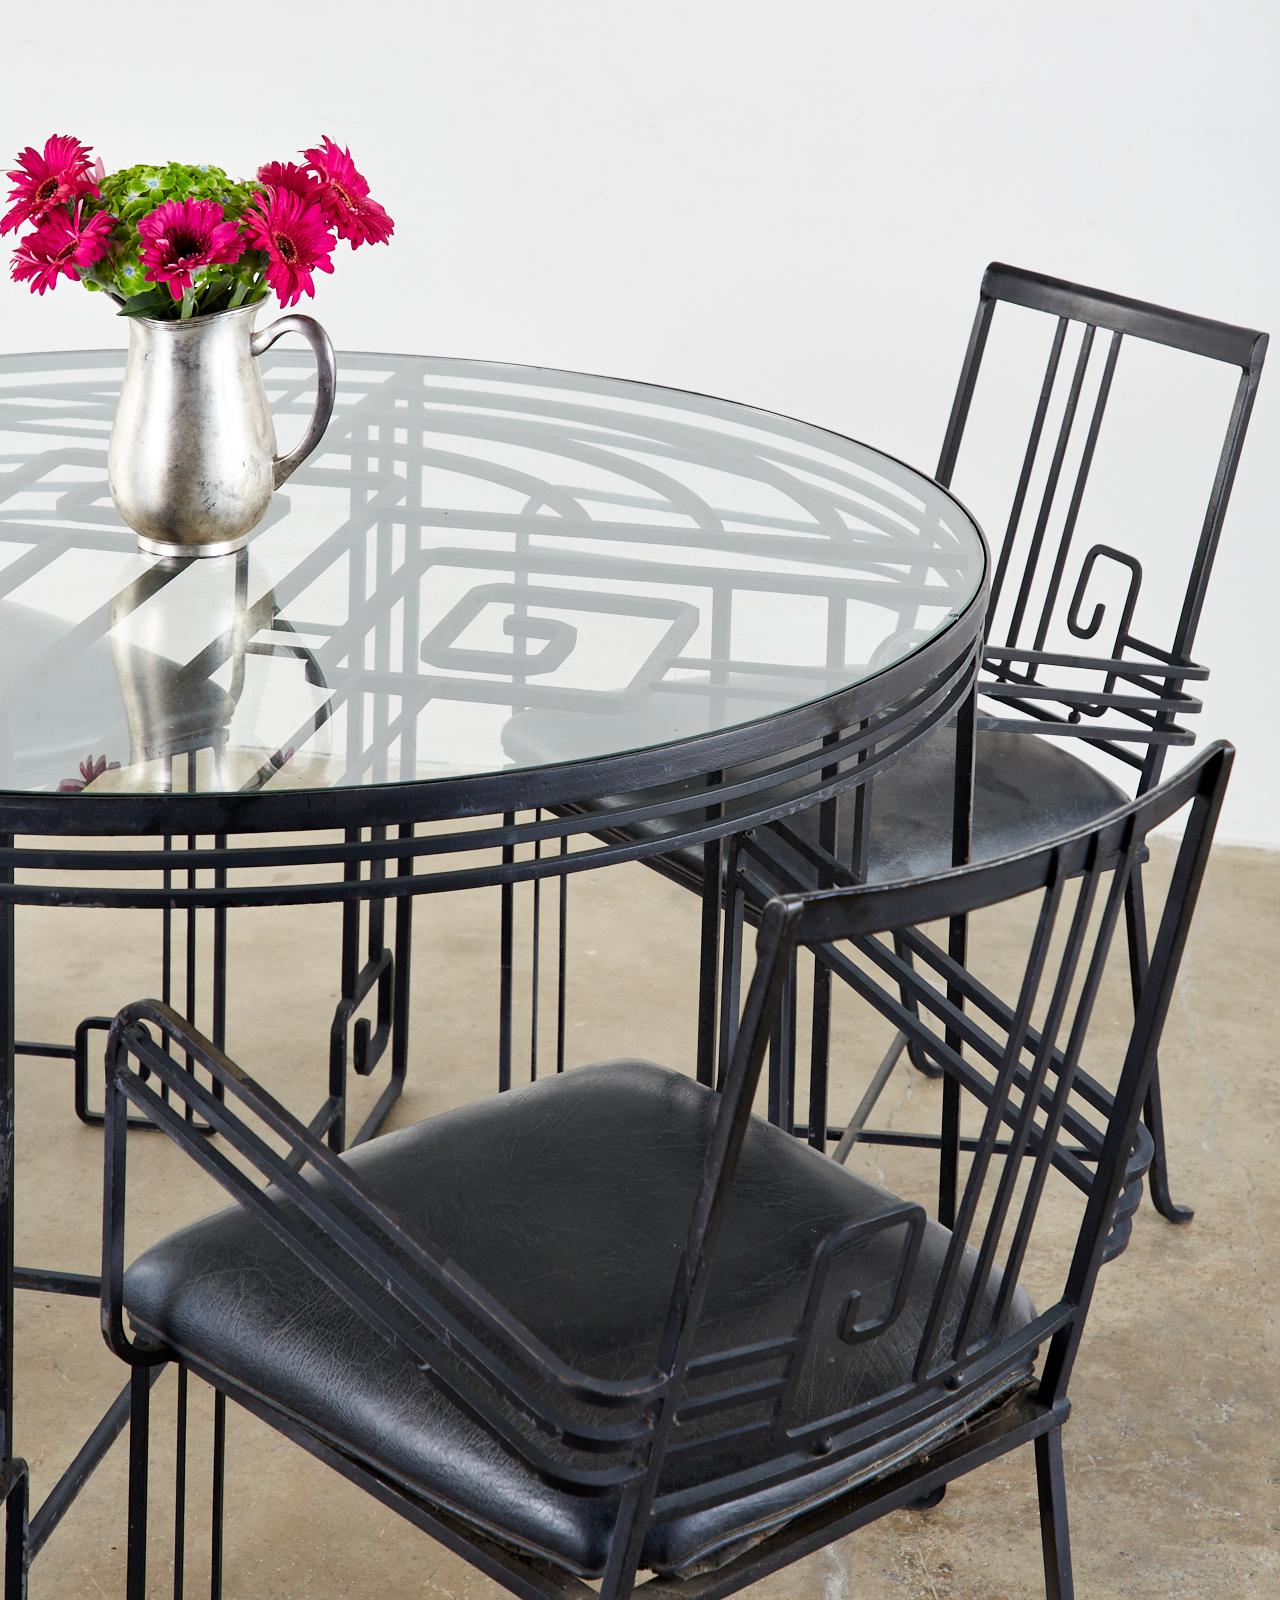 Salterini Style Art Deco Garden Dining Table and Chairs 1